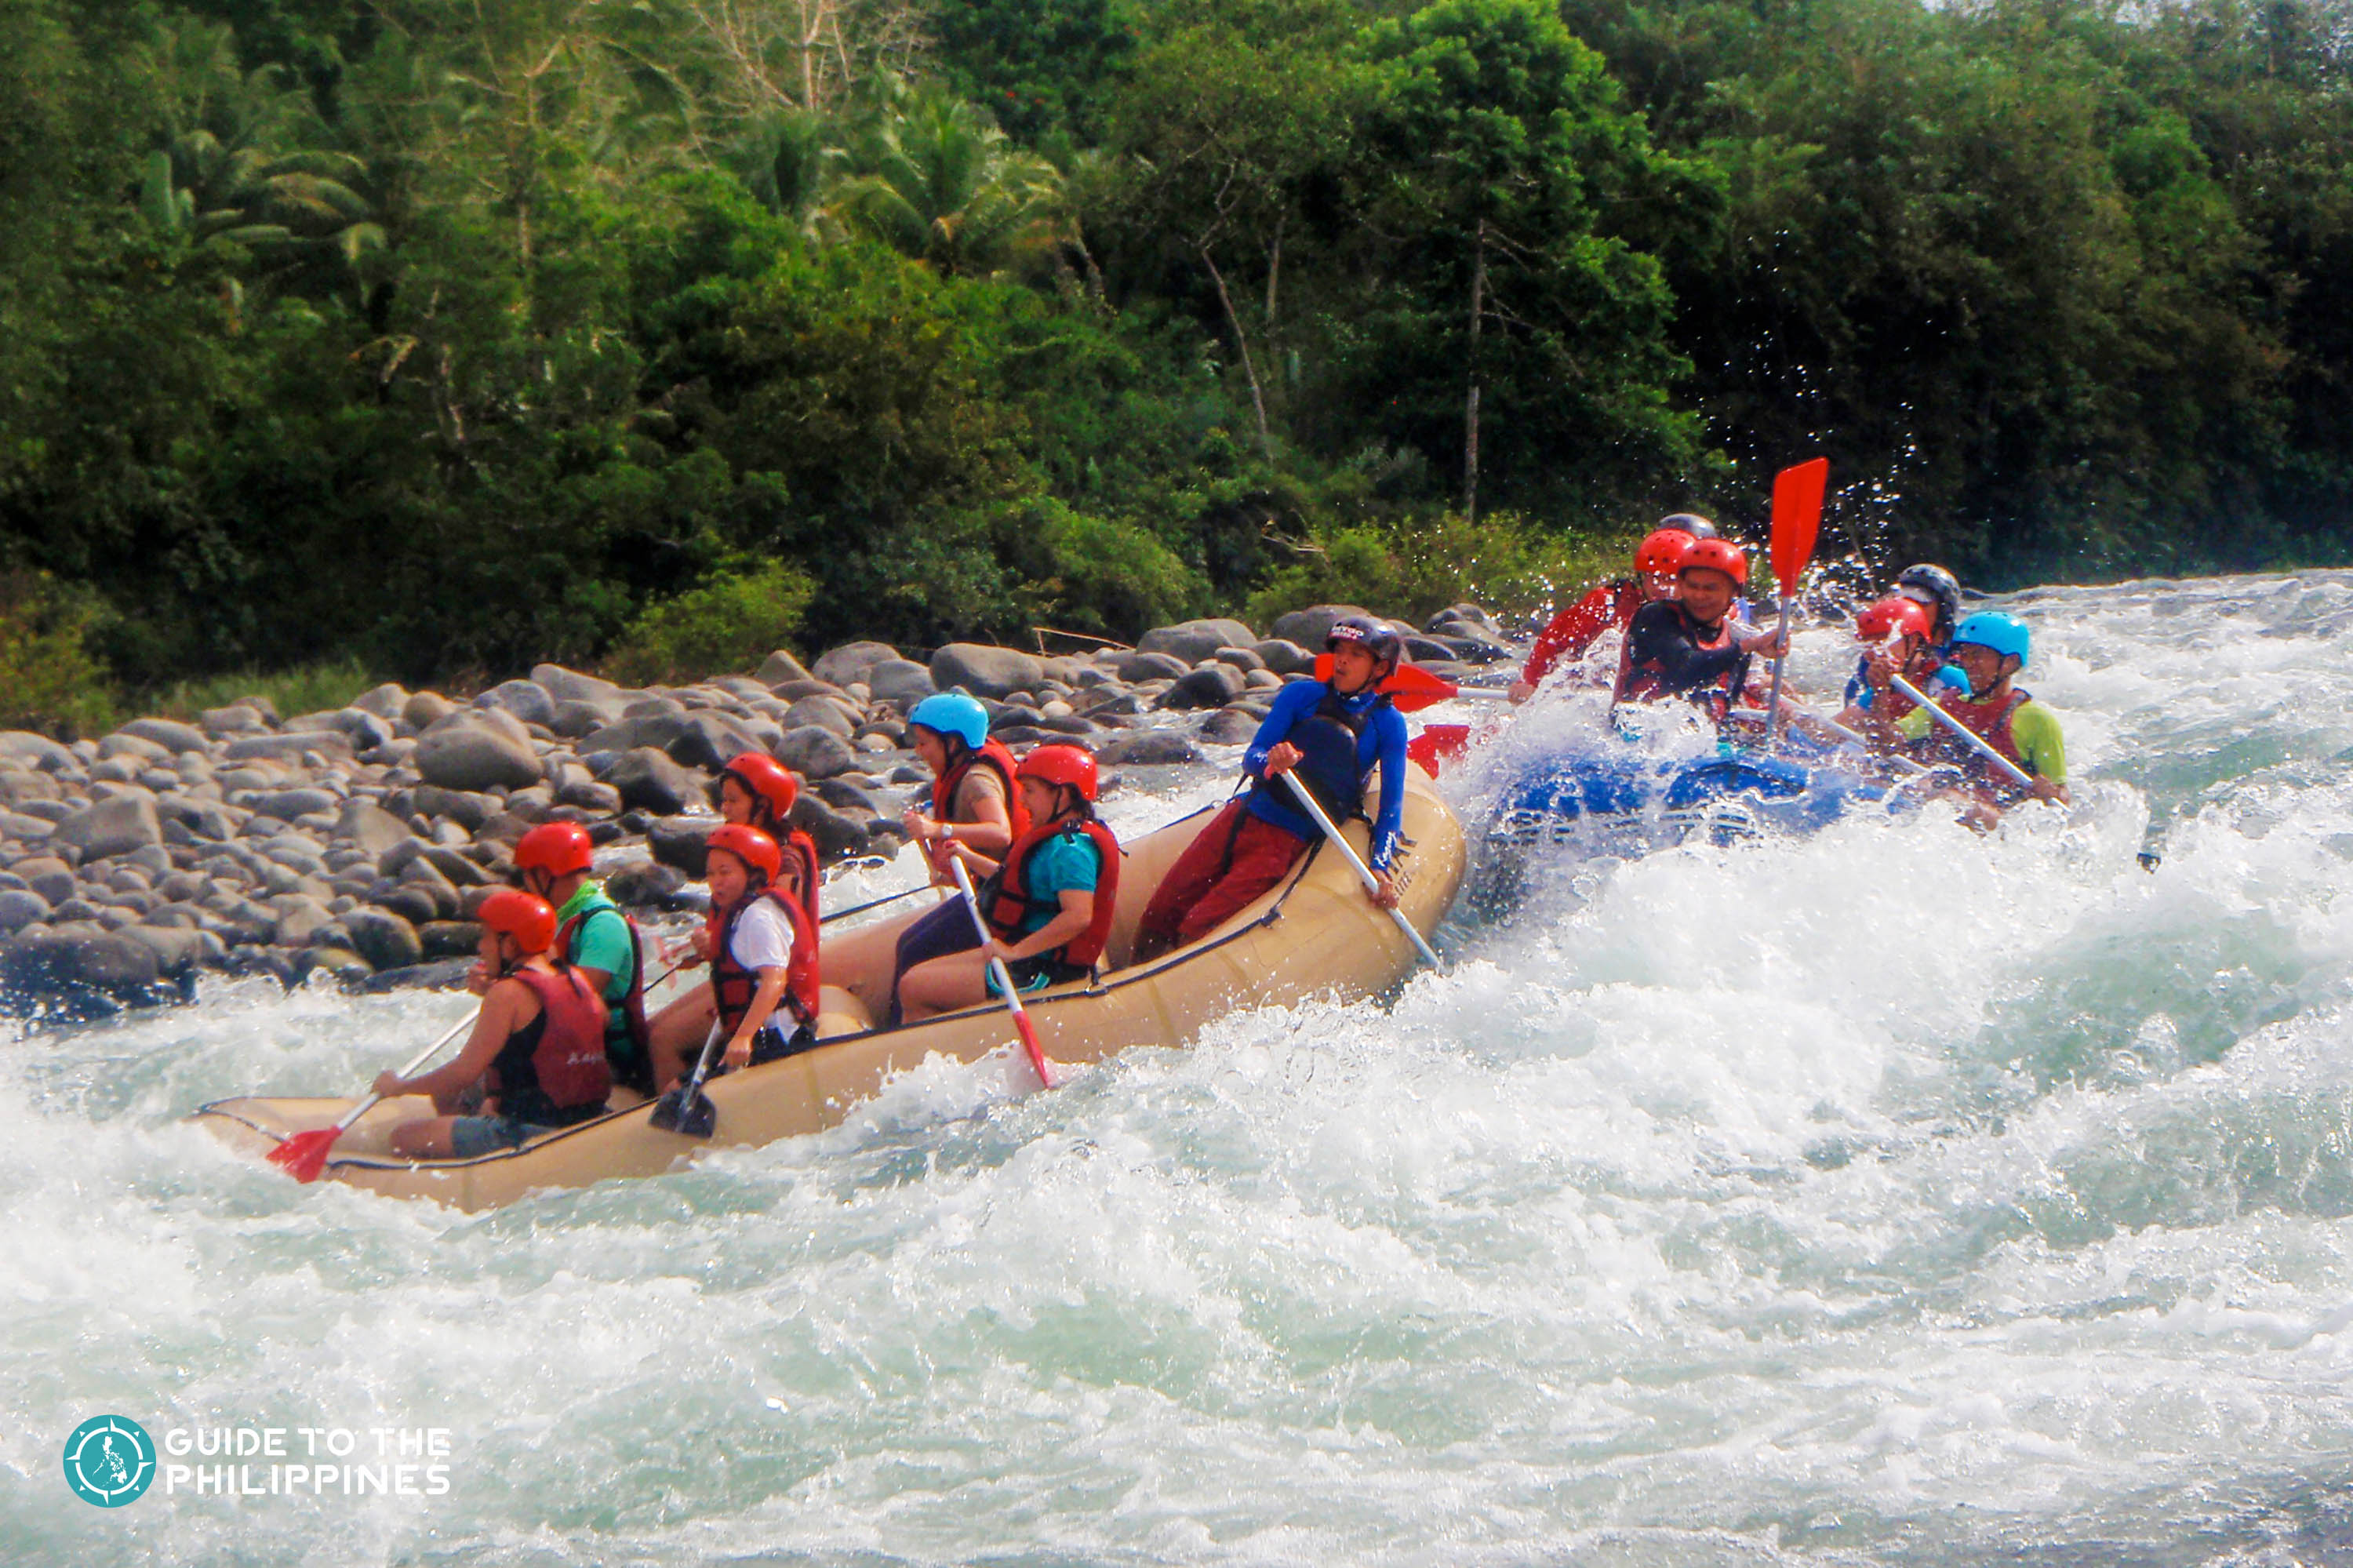 Cagayan De Oro Travel Guide: Whitewater Rafting Capital of the Philippines